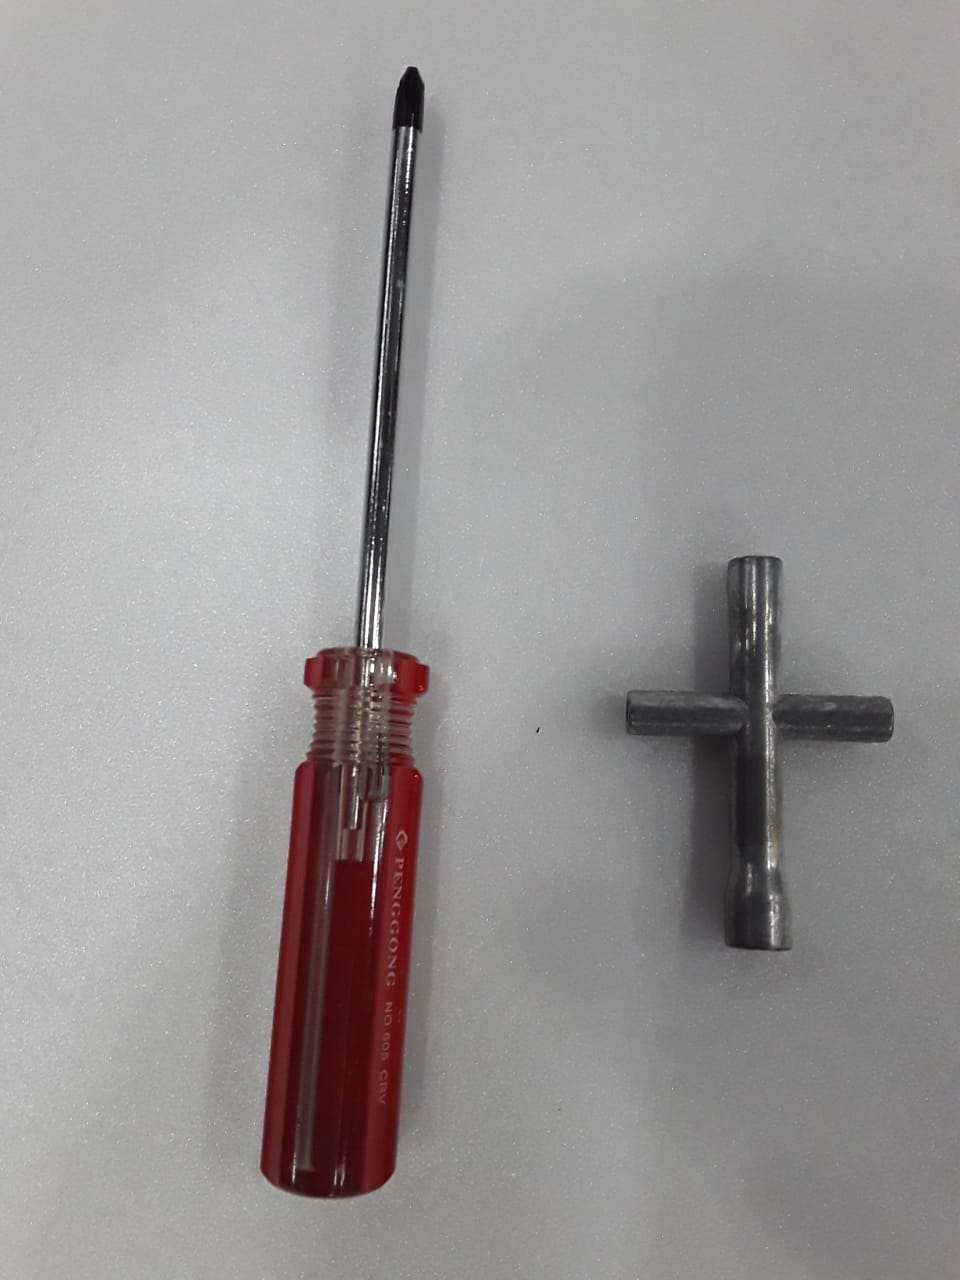 Screw Driver With 4 Way Wrench